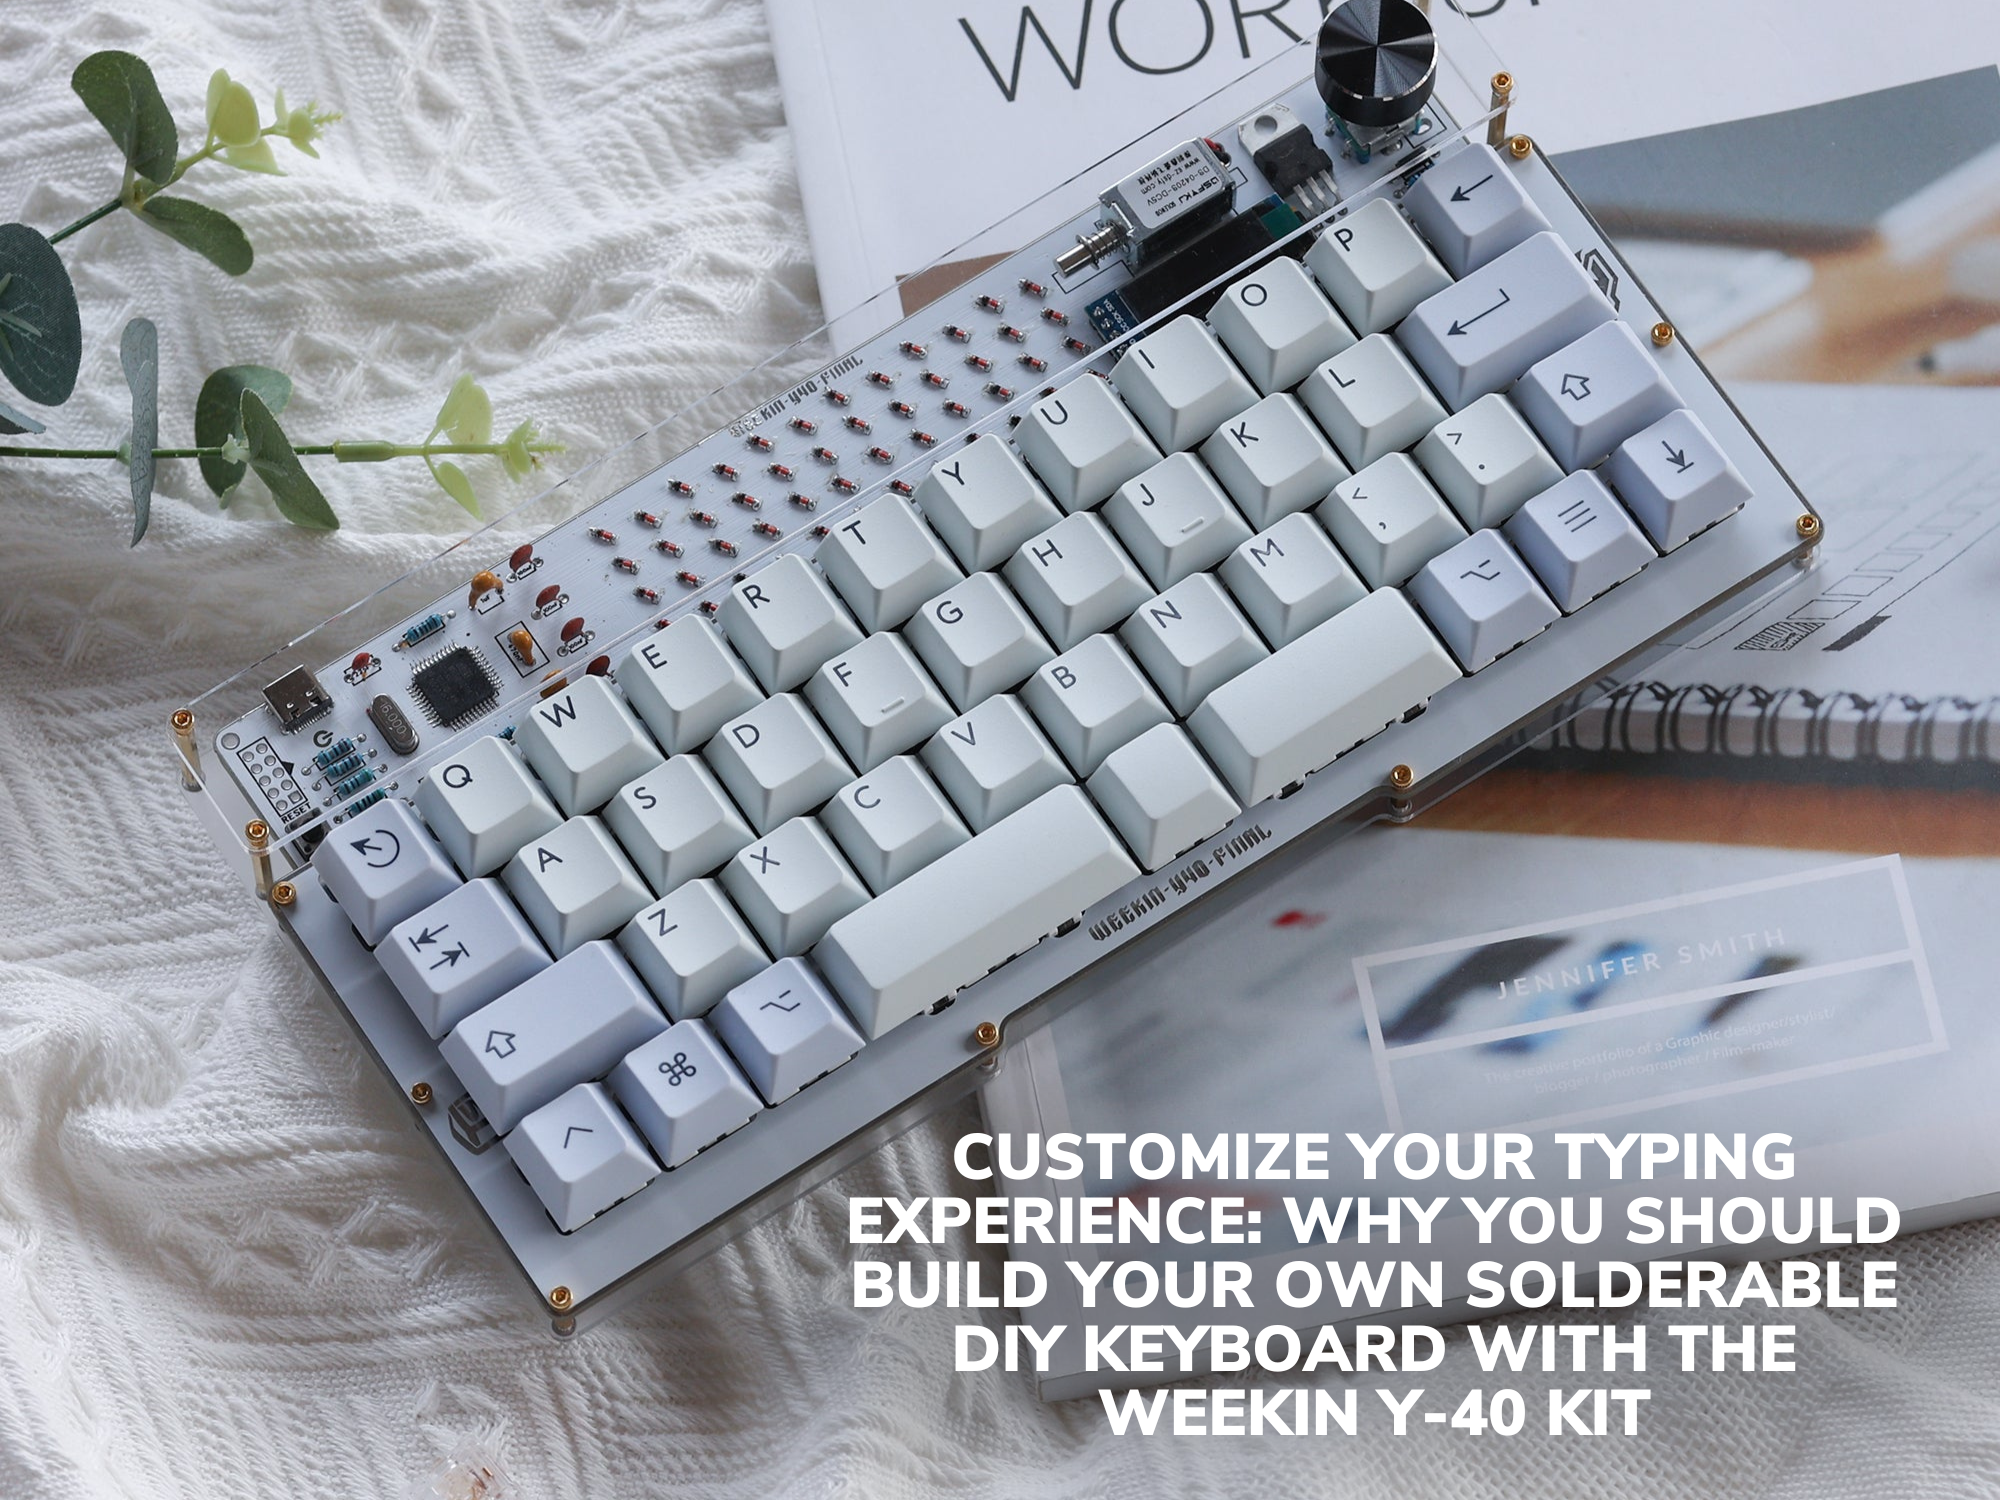 Customize Your Typing Experience: Why You Should Build Your Own Solderable DIY Keyboard with the Weekin Y-40 Kit